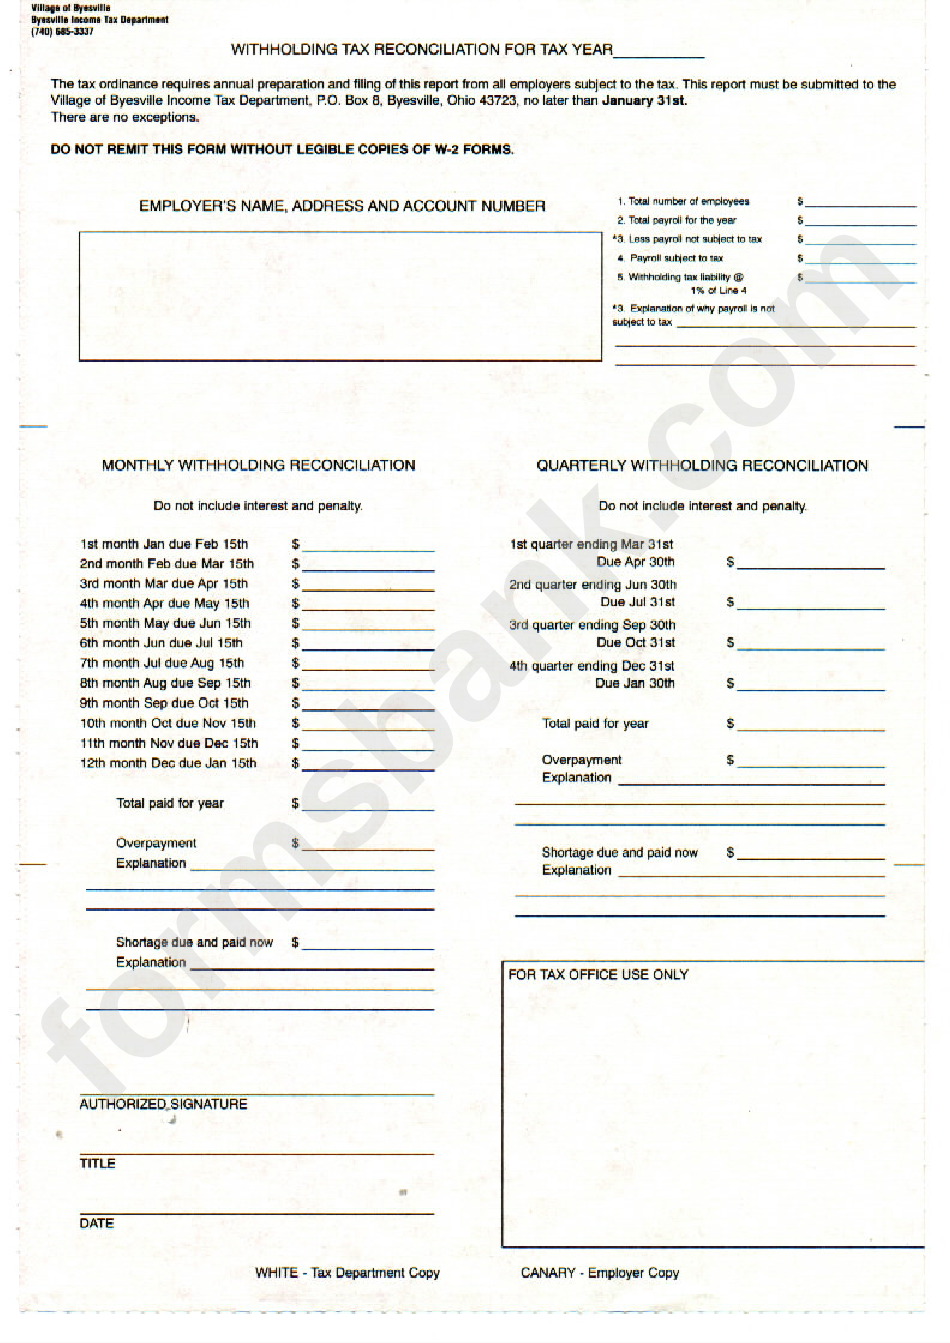 Withholding Tax Reconciliation Form - Income Tax Department - Byesville - Ohio